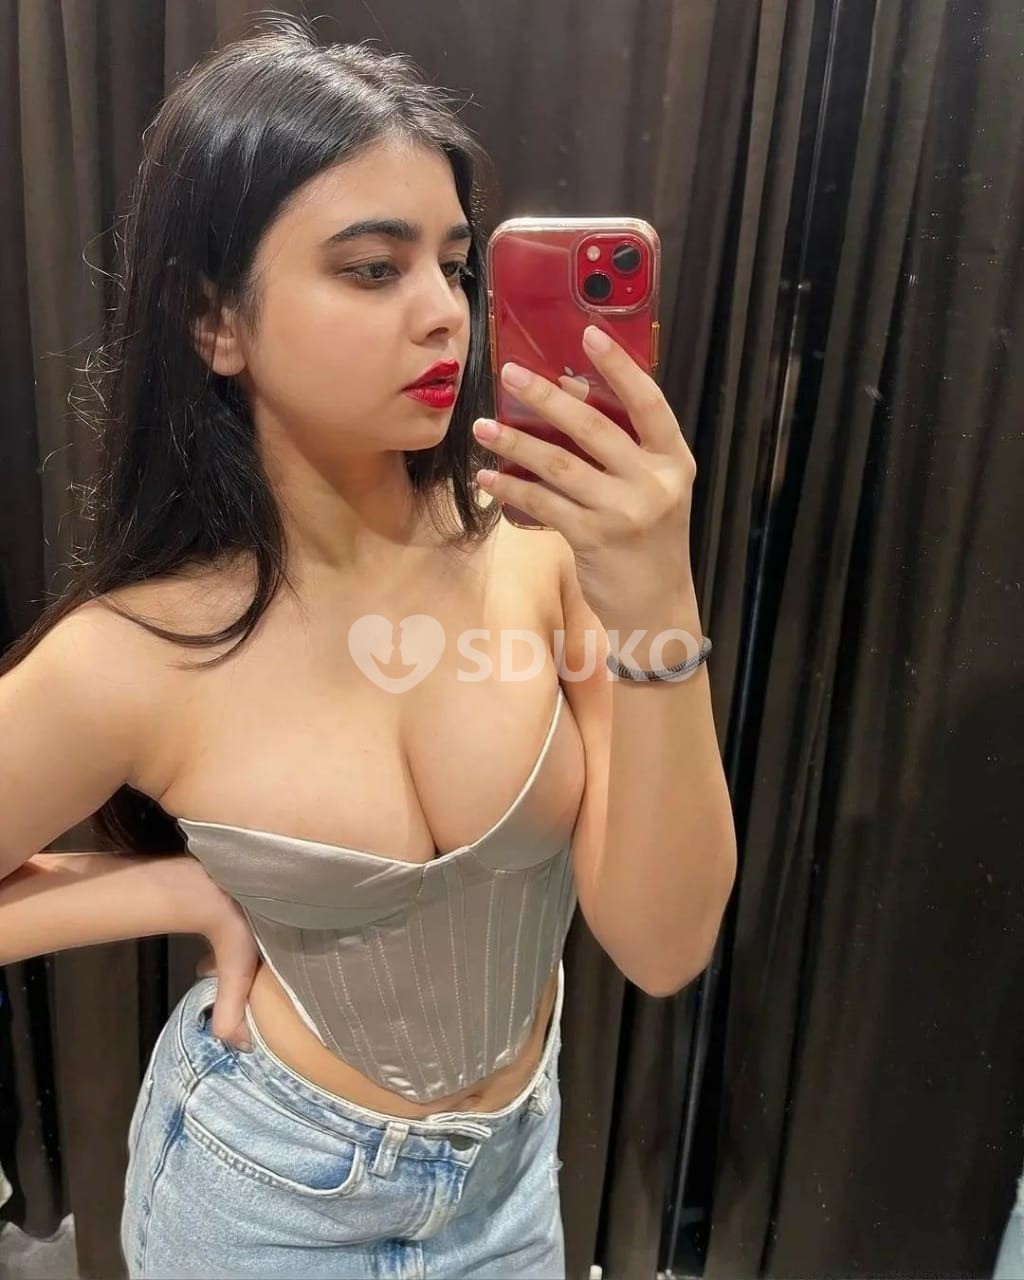 KATRAJ VIP TODAY LOW _'PRICE ESCORT 🥰SERVICE 100% SAFE AND SECURE ANYTIME CALL ME 24 X 7 SERVICE AVAILABLE 100% SAFE